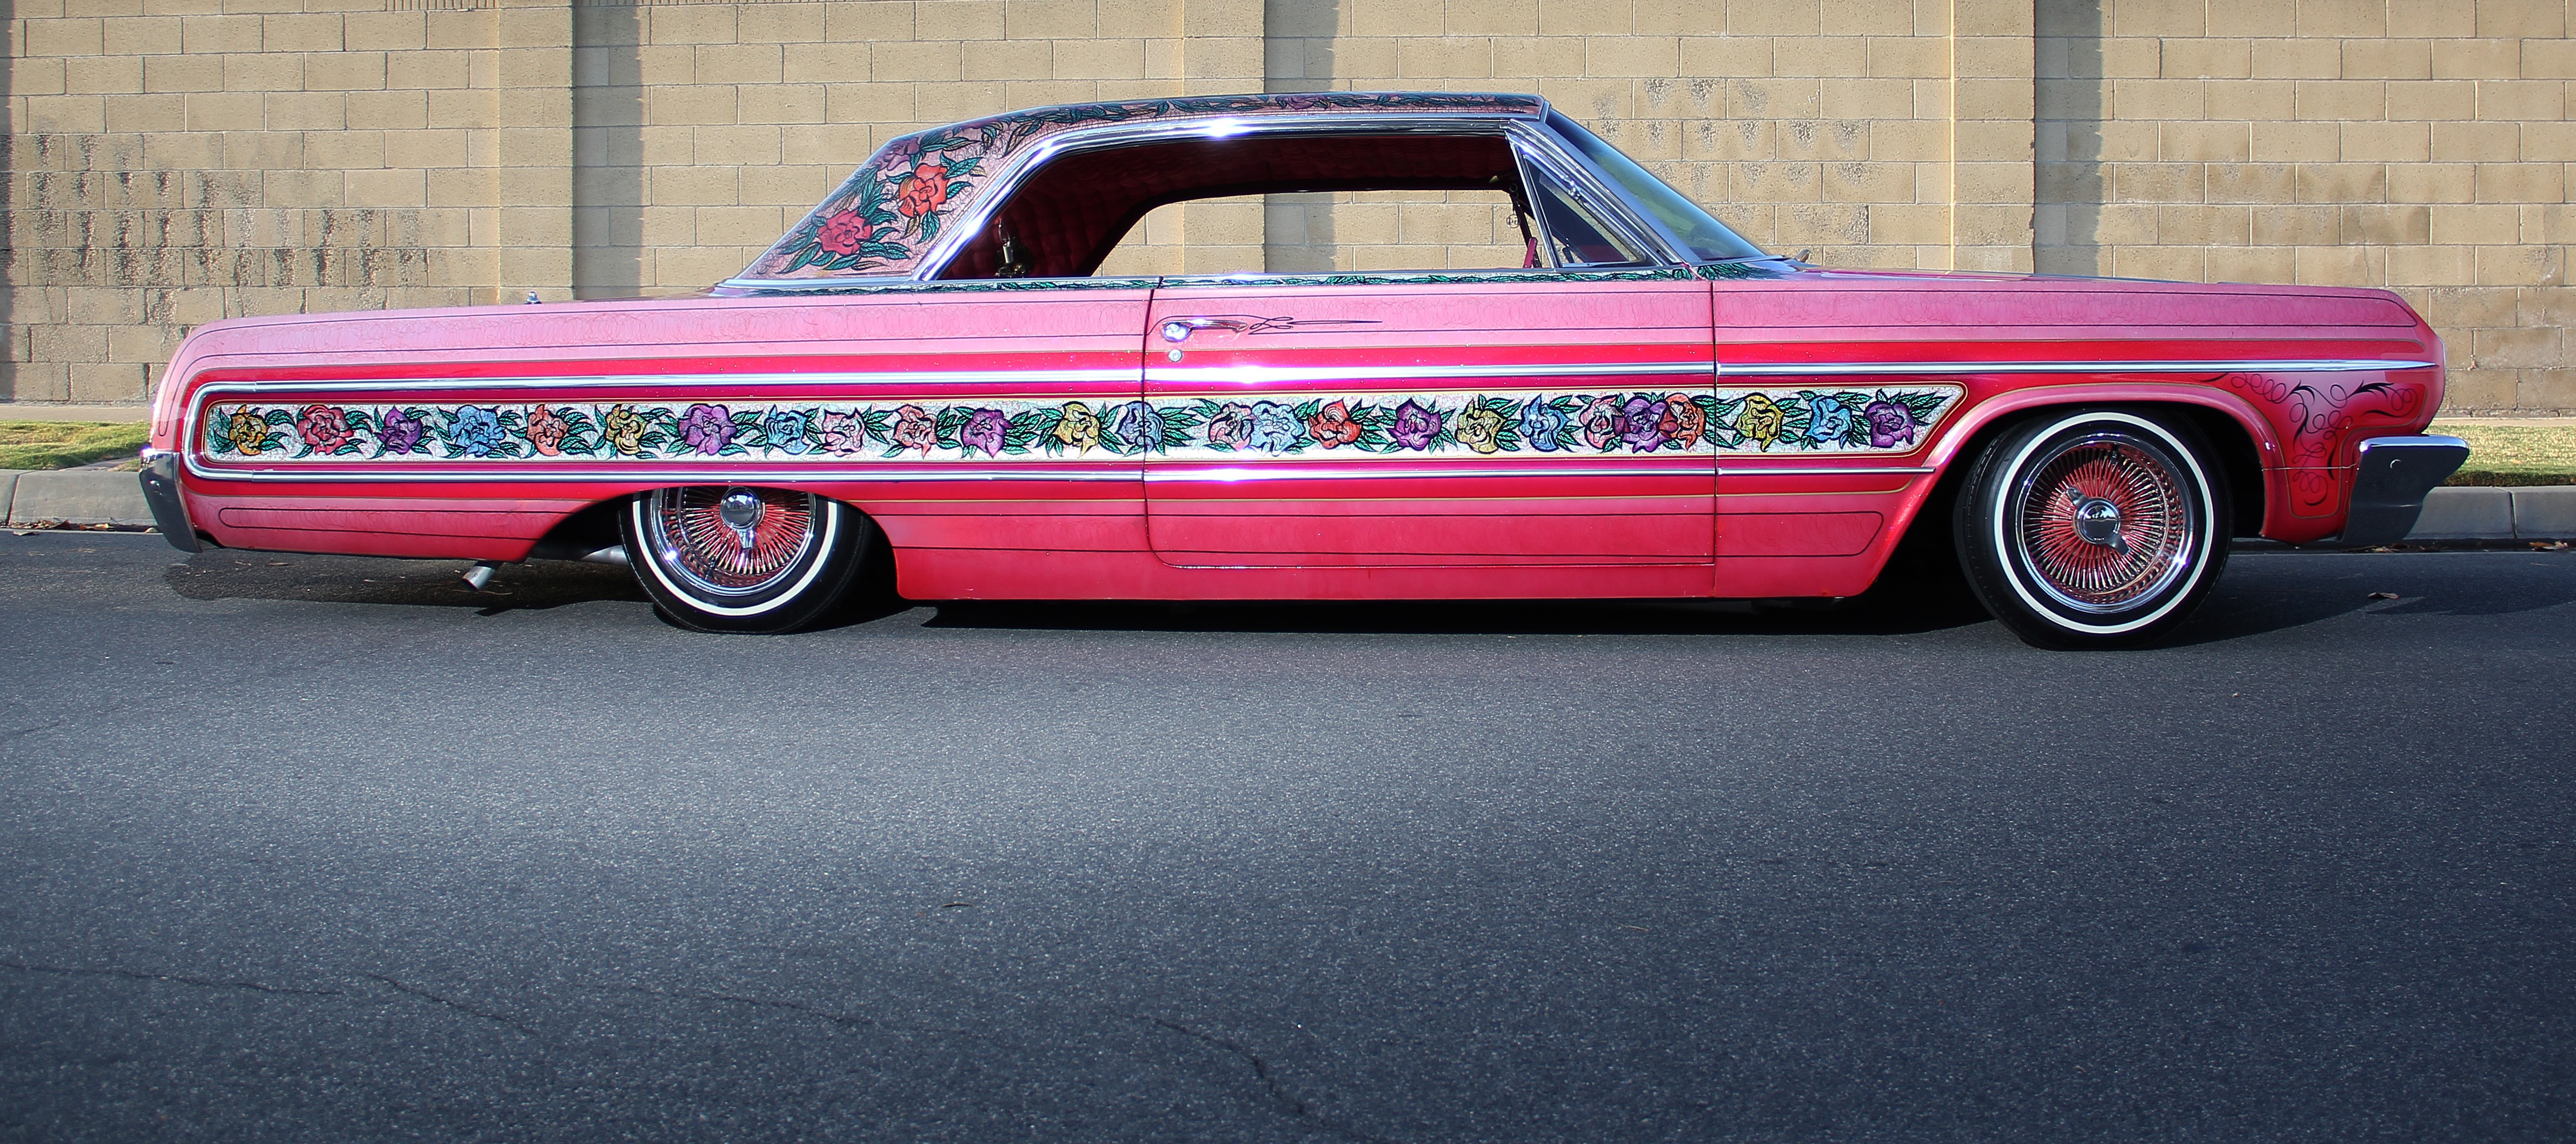 4764x2116 > Lowrider Wallpapers